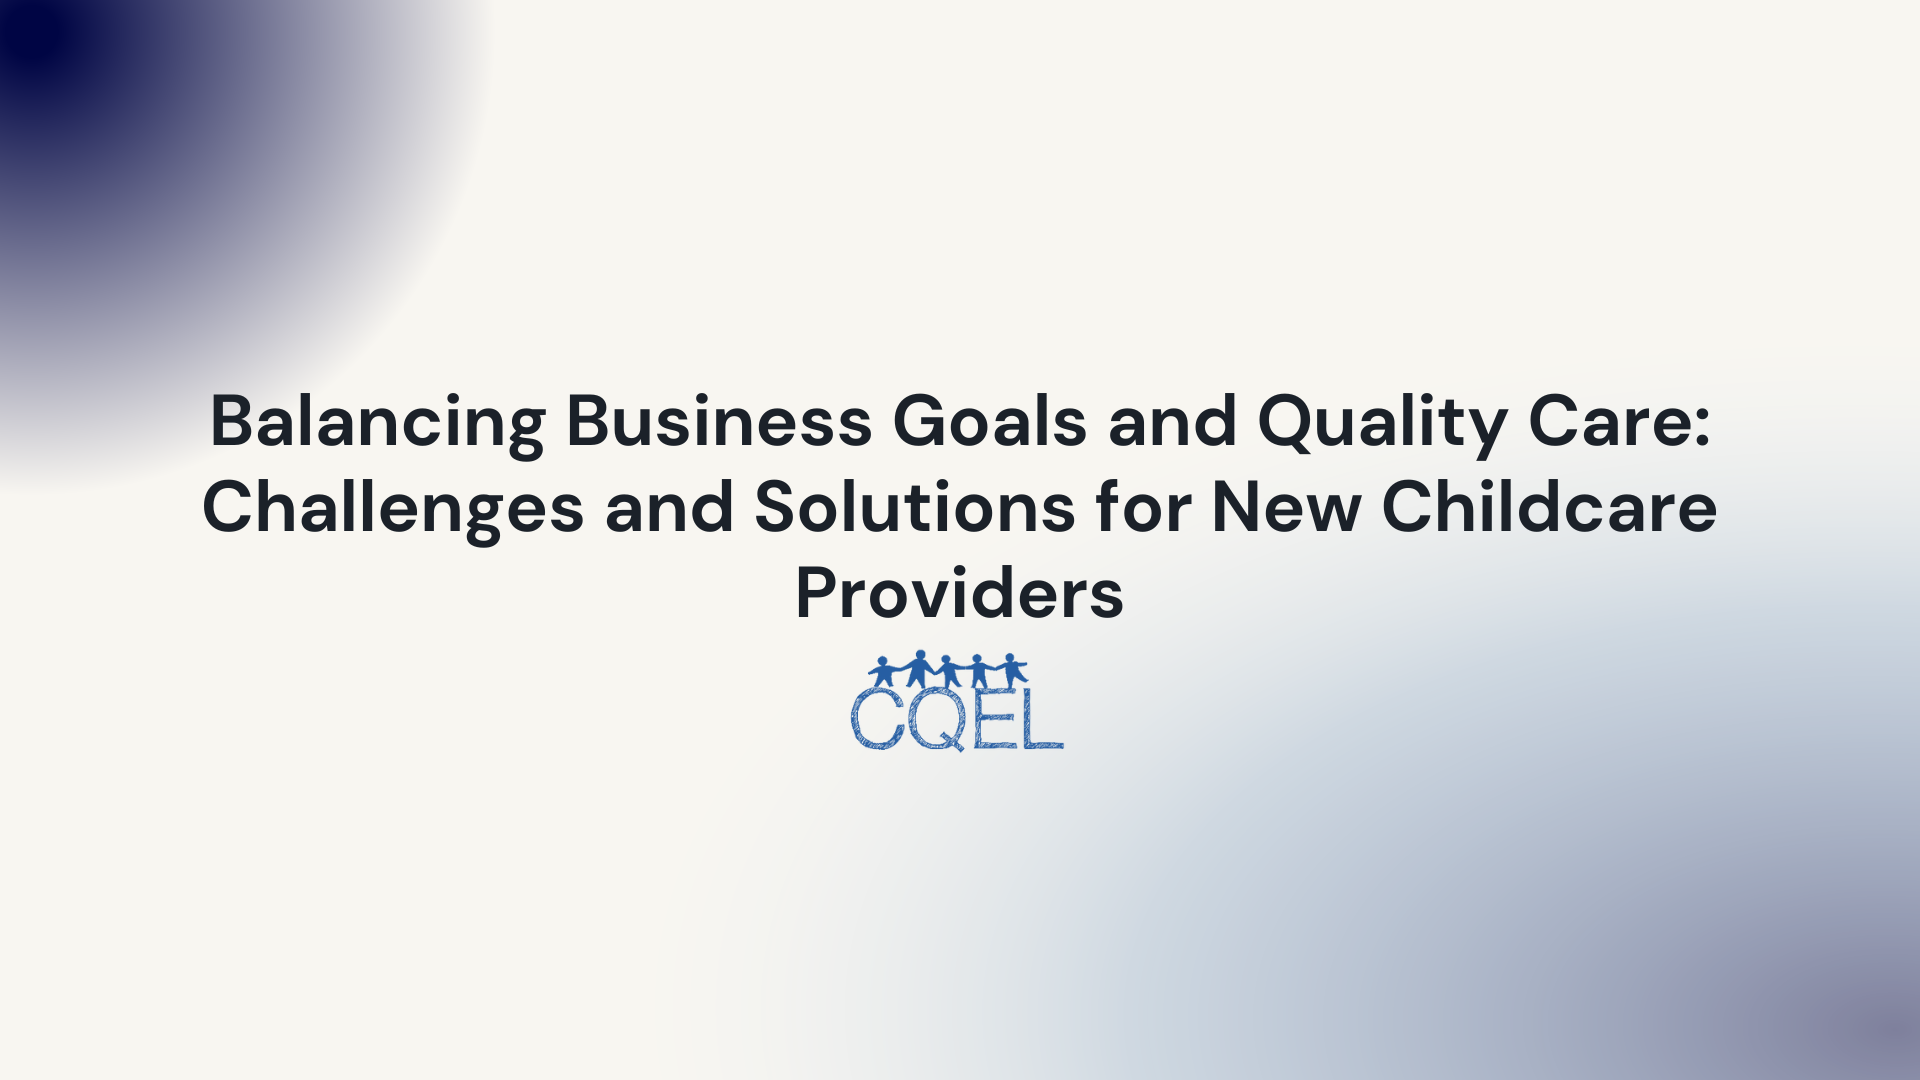 Balancing Business Goals and Quality Care: Challenges and Solutions for New Childcare Providers